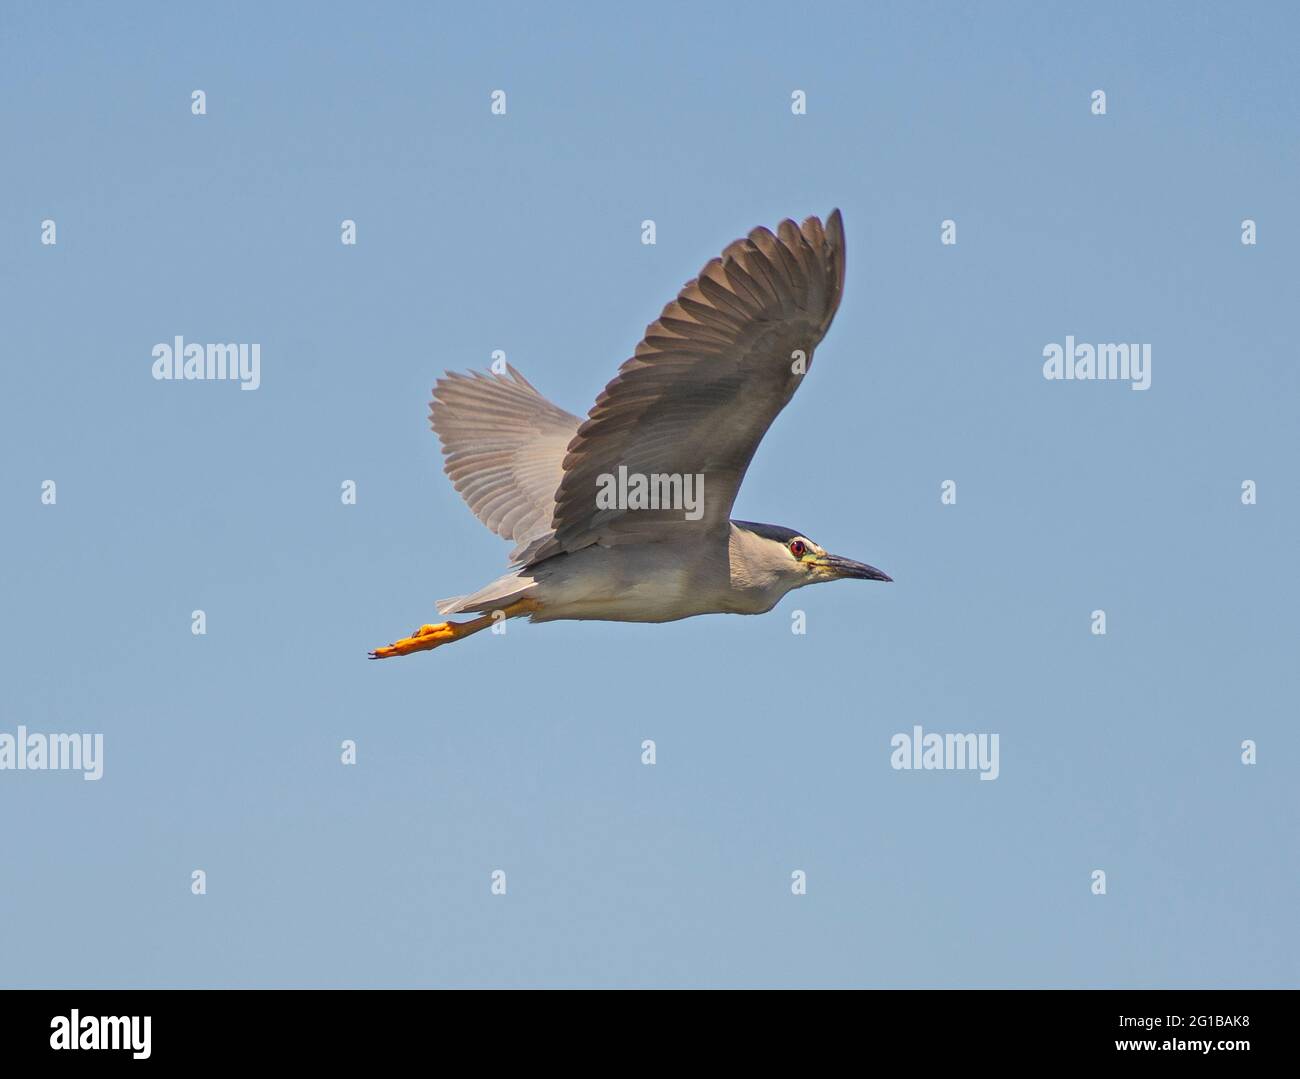 Black-crowned night heron nycticorax nycticorax in flight against blue sky background with minaret tower Stock Photo